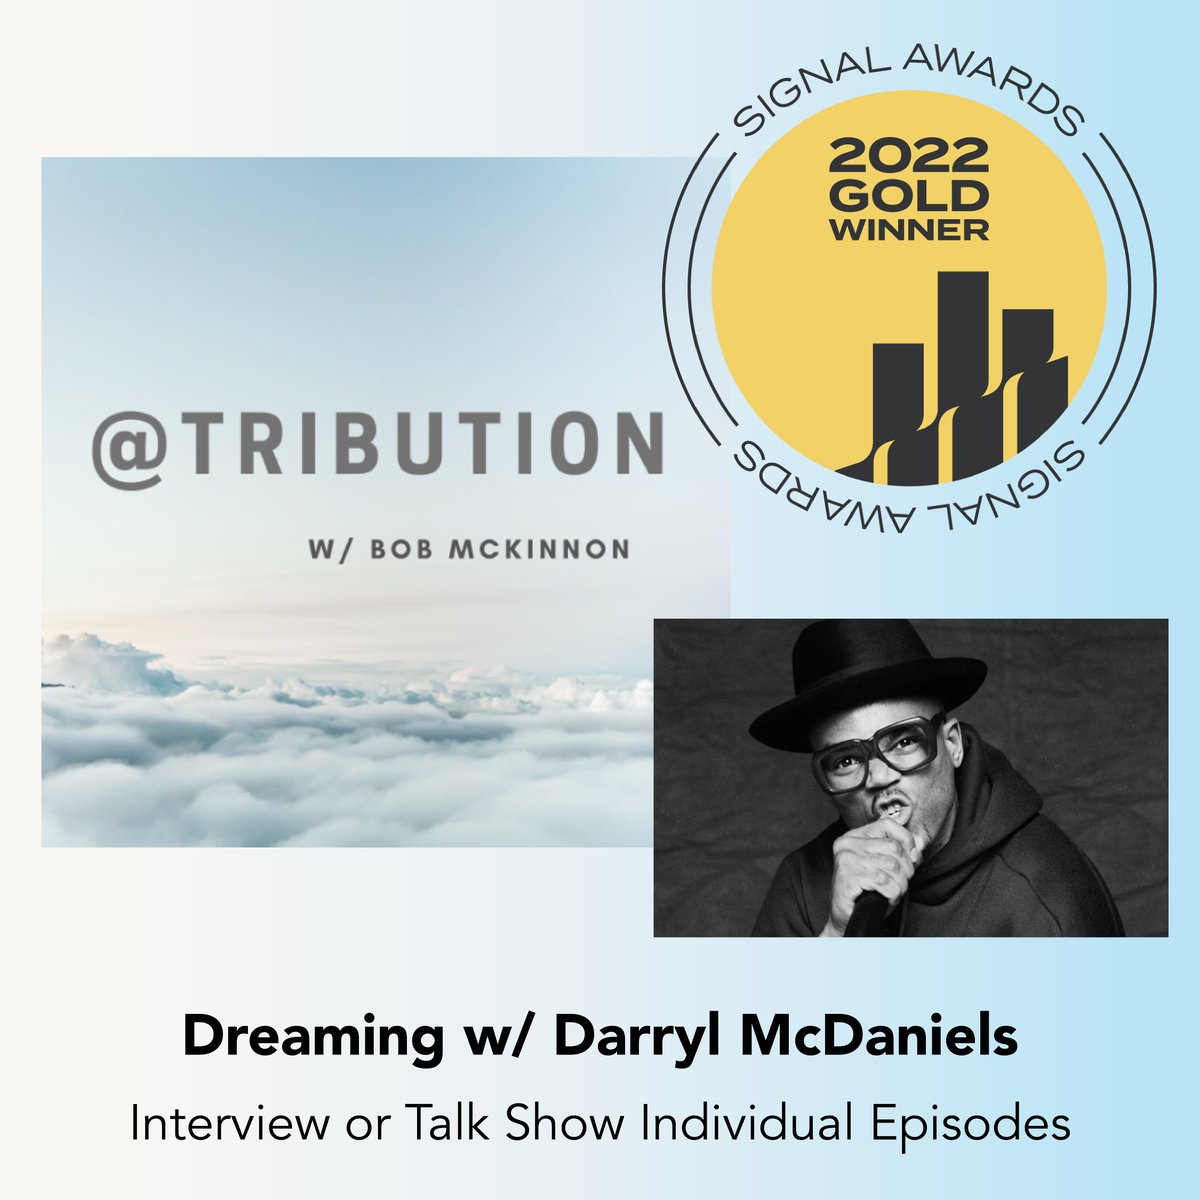 🎉 Congrats! As a Signal Award Winner, this episode was singled out of over 1,700 submissions from over 30 countries. To listen to this “Attribution” episode, click here: to.pbs.org/3Qz8mh8 @THEKINGDMC @signalawards @movingupusa